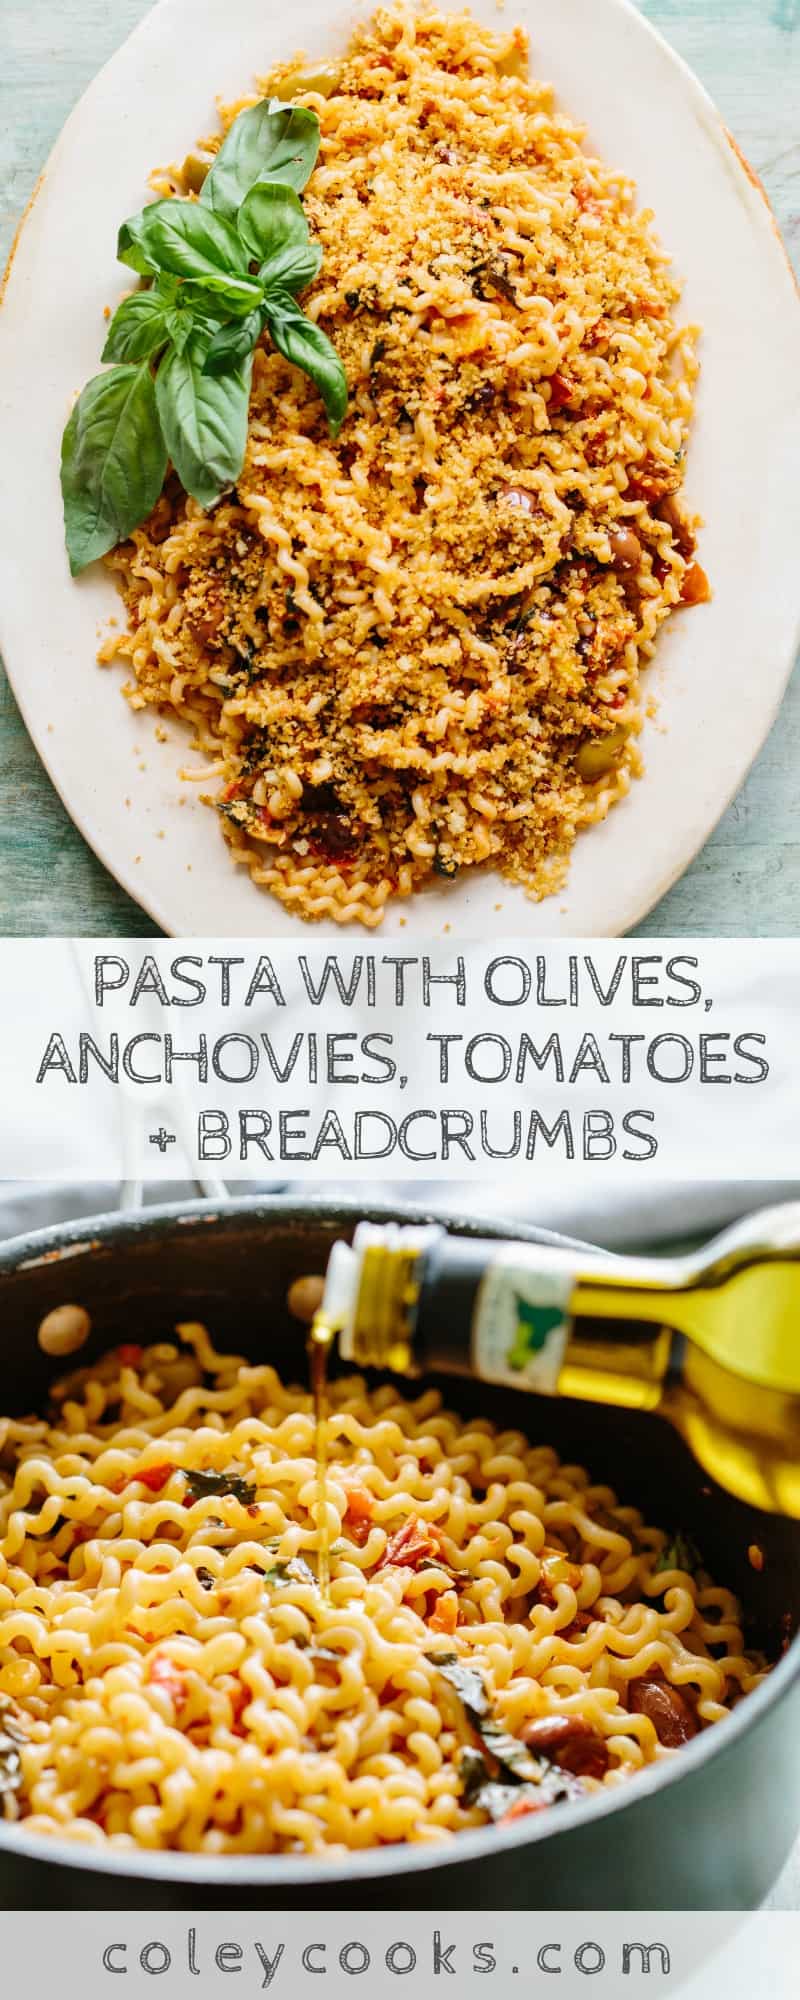 PASTA with OLIVES, ANCHOVIES, TOMATOES + BREADCRUMBS | This easy and flavorful pasta recipe is made with mostly pantry ingredients and can be on the table in under 20 minutes. #sponsored #pasta #recipe #anchovies #olives #easy #pantry | ColeyCooks.com